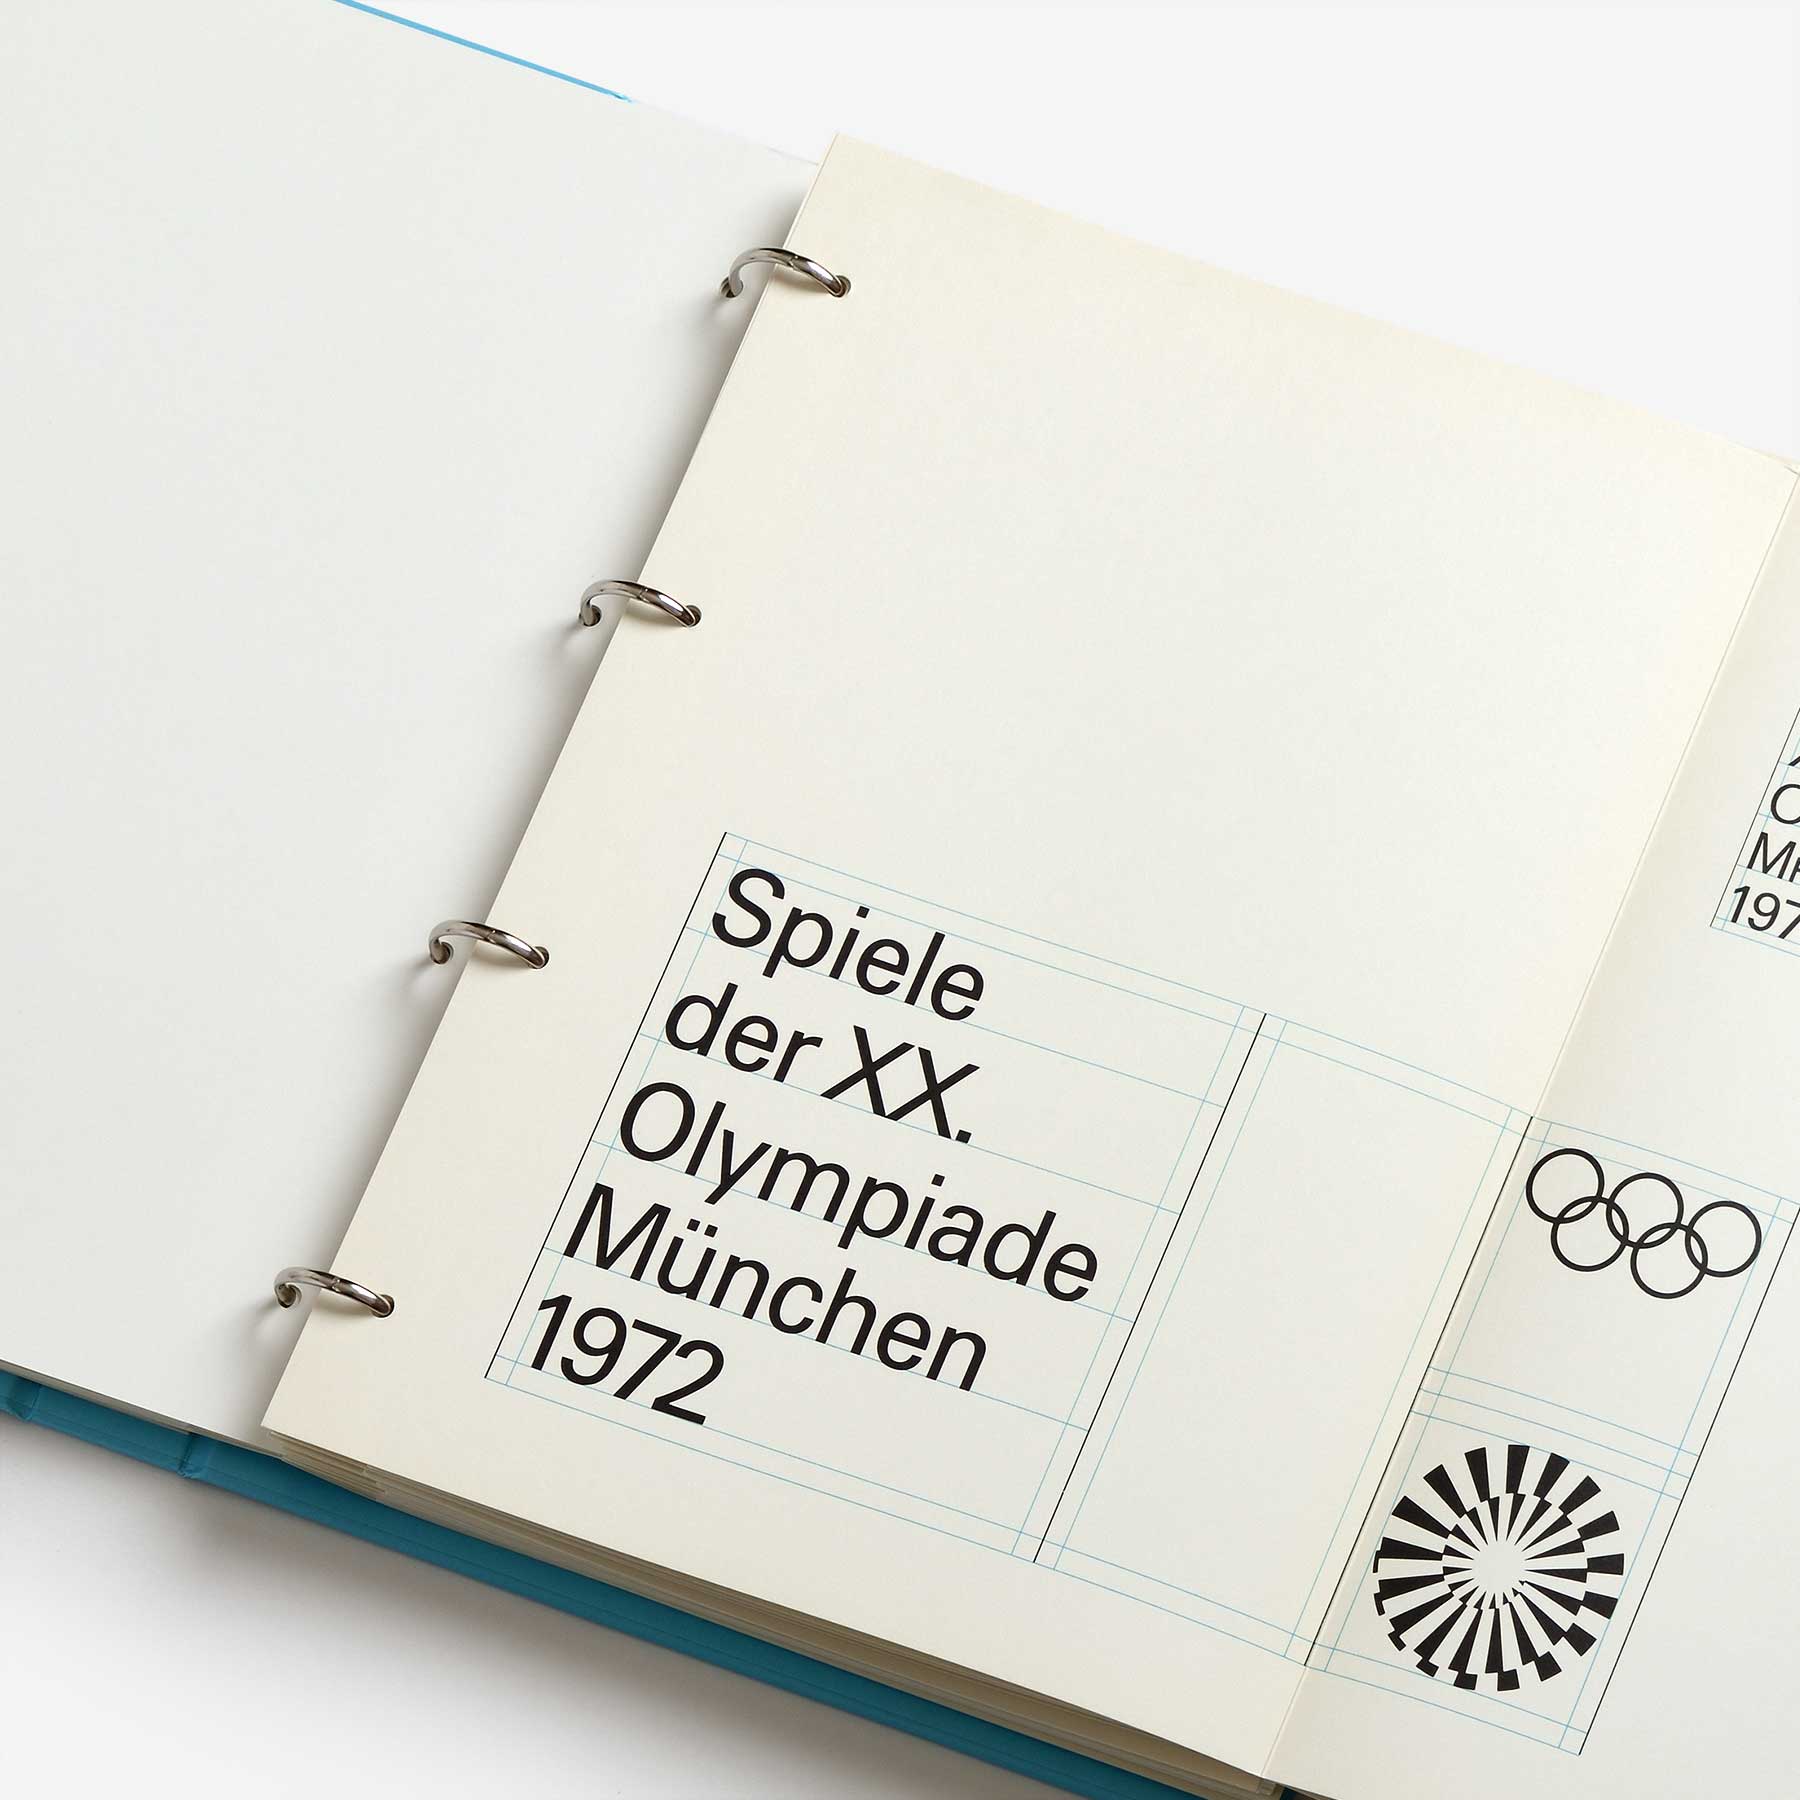 Guidelines and Standards for the Visual Design: The Games of the XX Olympiad Munich 1972